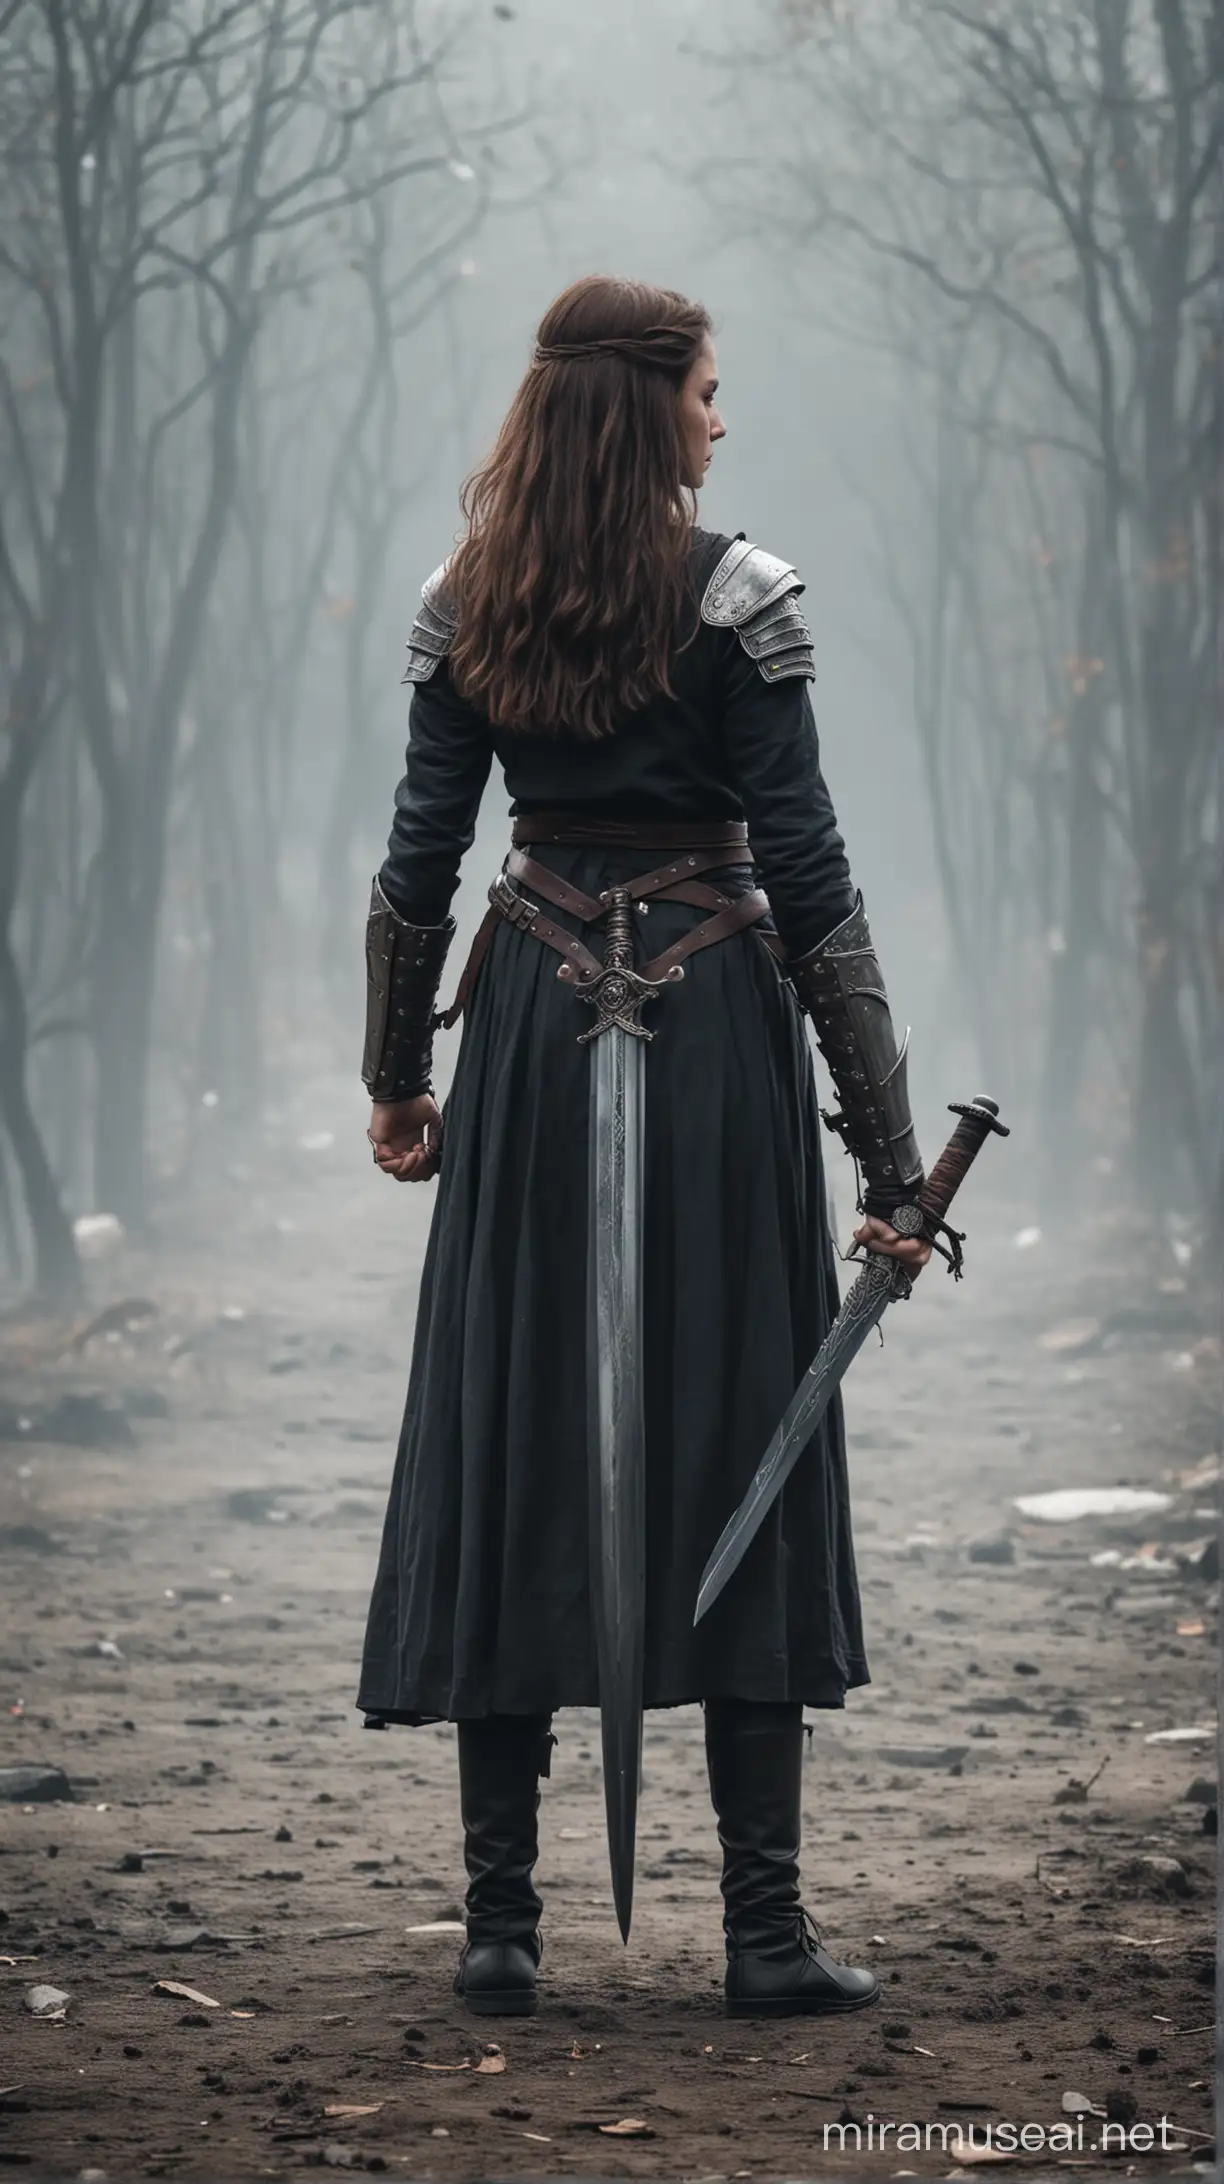 Young Warrior Girl Standing Firm with Sword